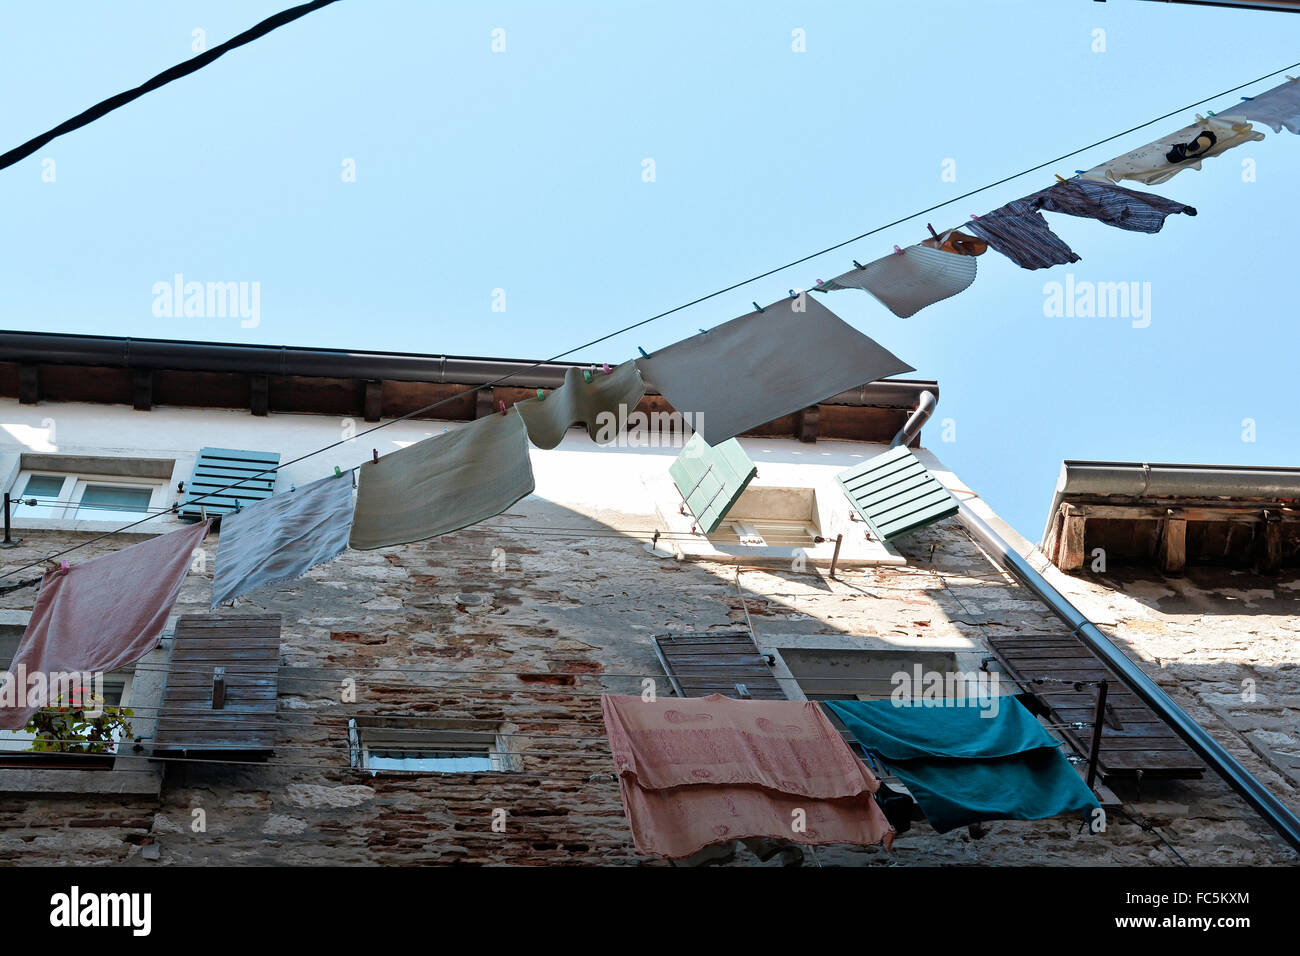 clothesline on an old house in Croatia Stock Photo